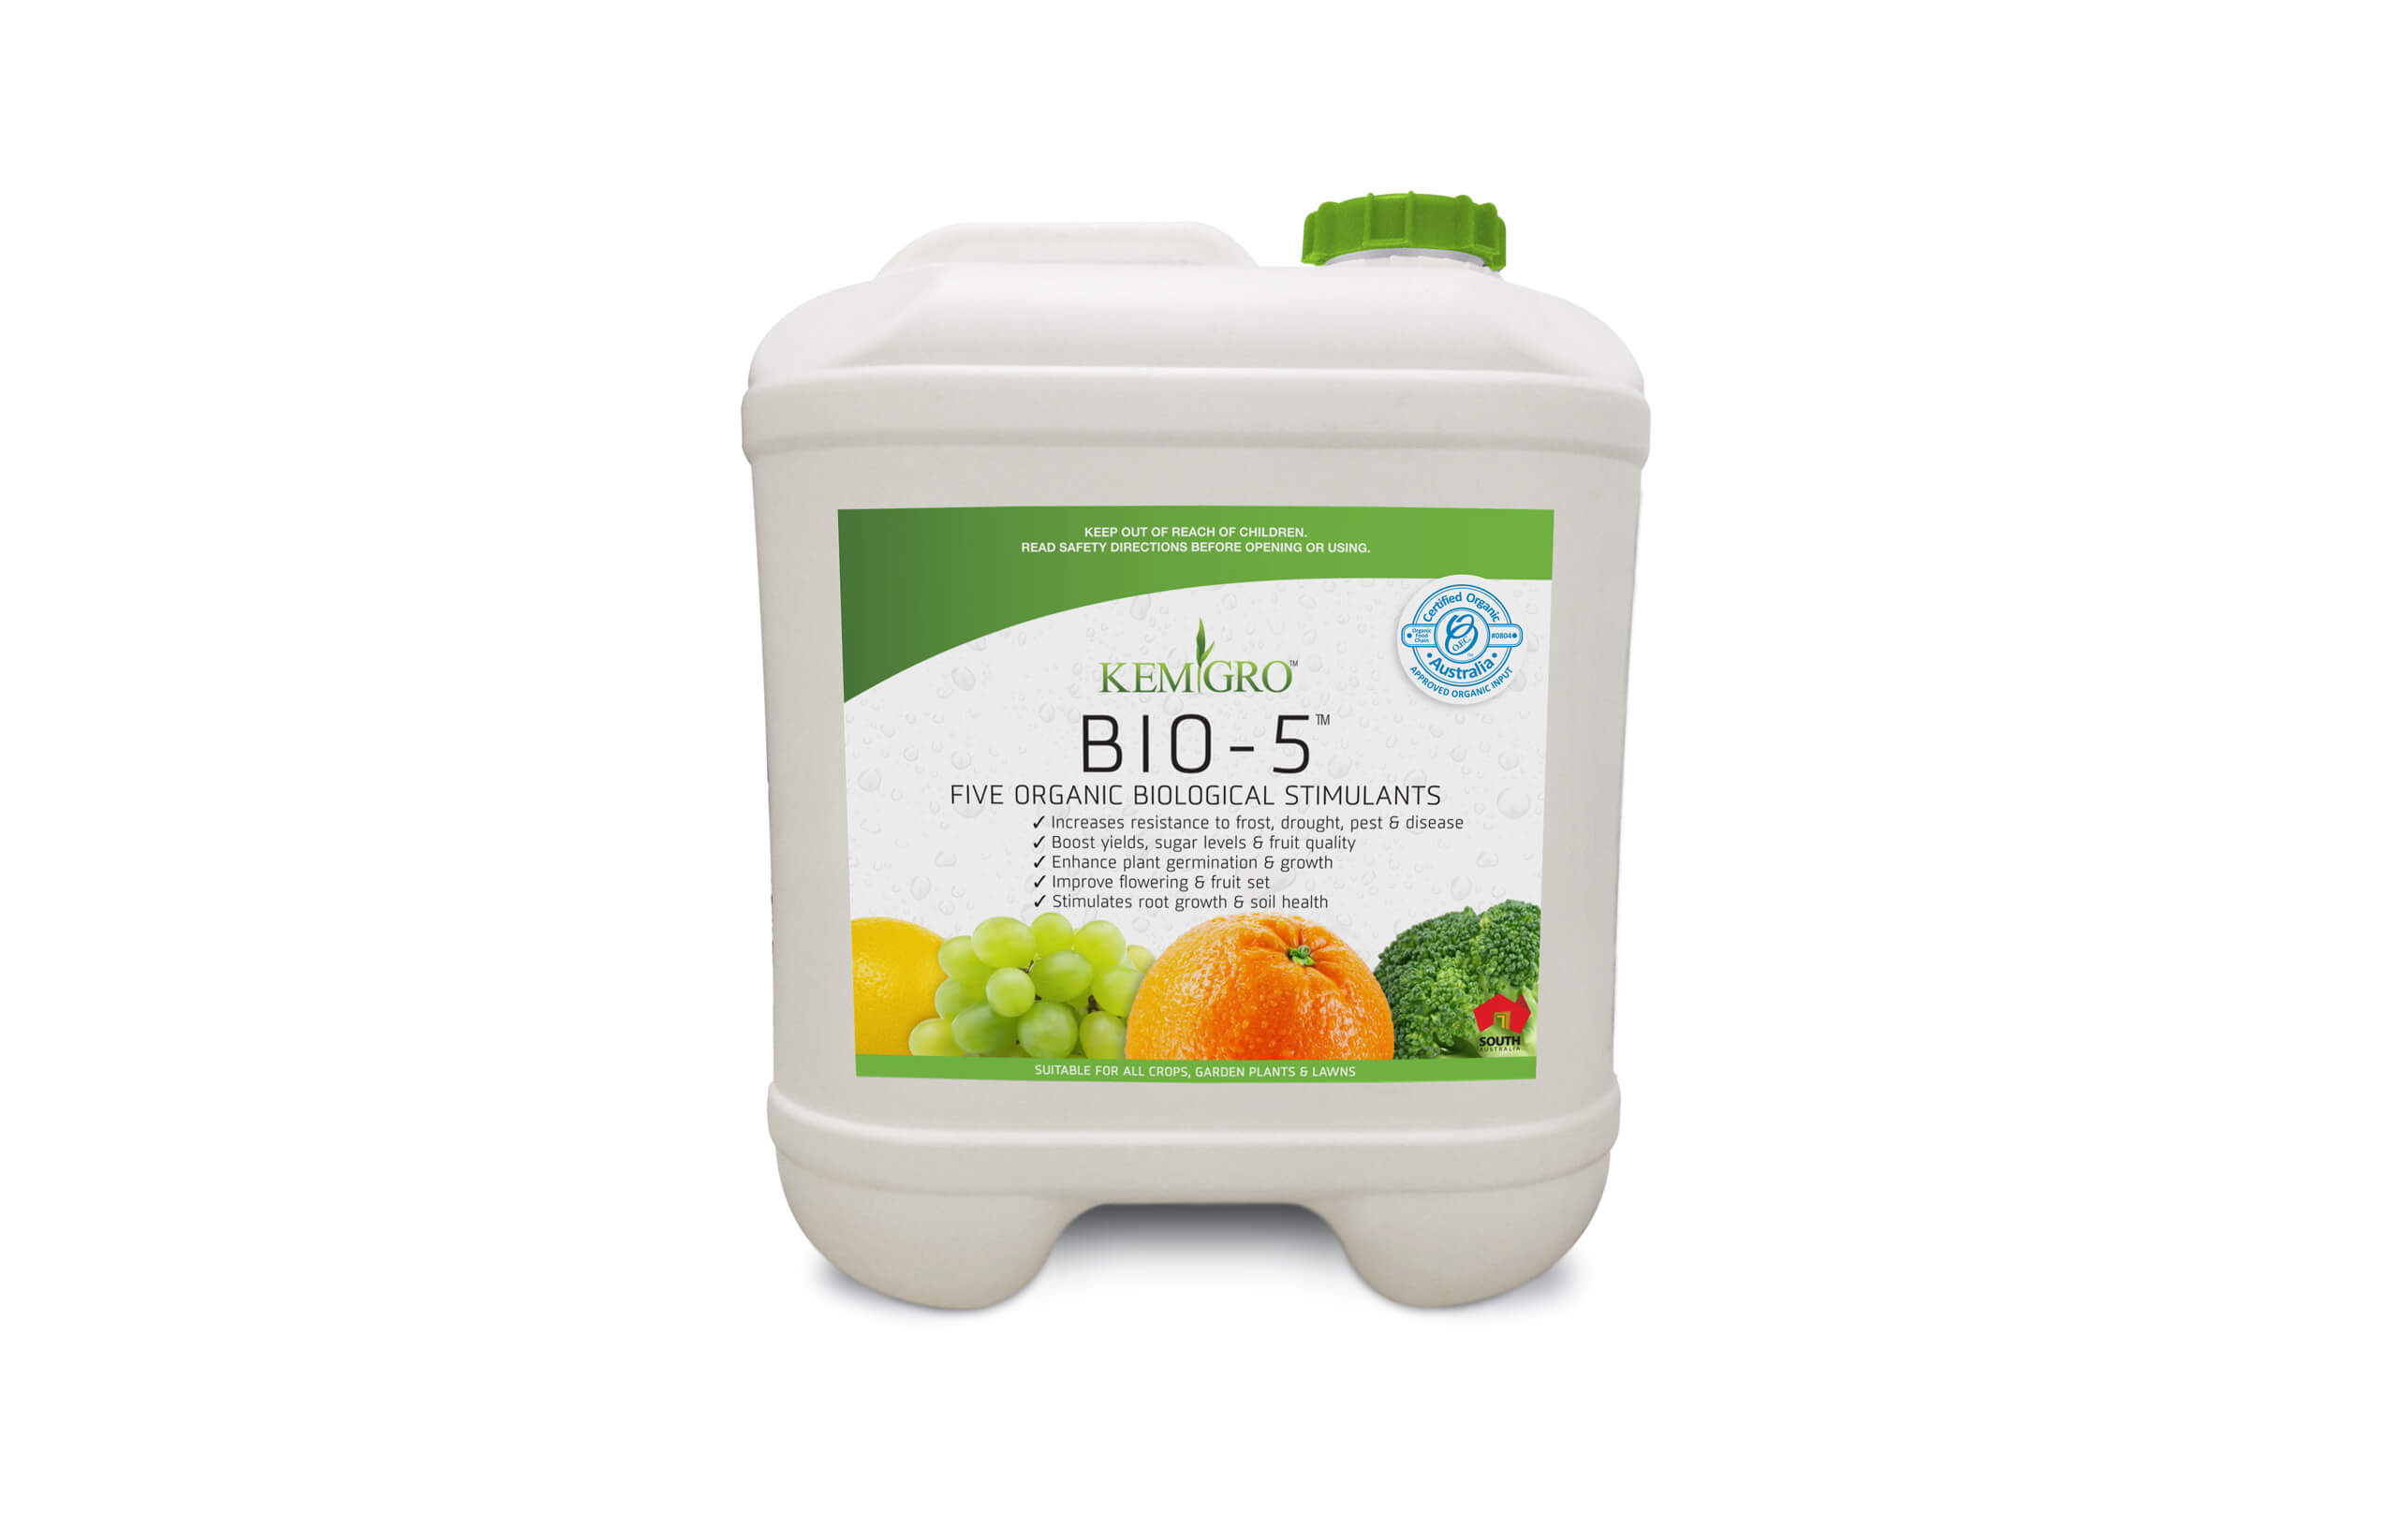 Icon Web Design Adelaide. Image of a Kemgro BIO - 5 20 litre container.